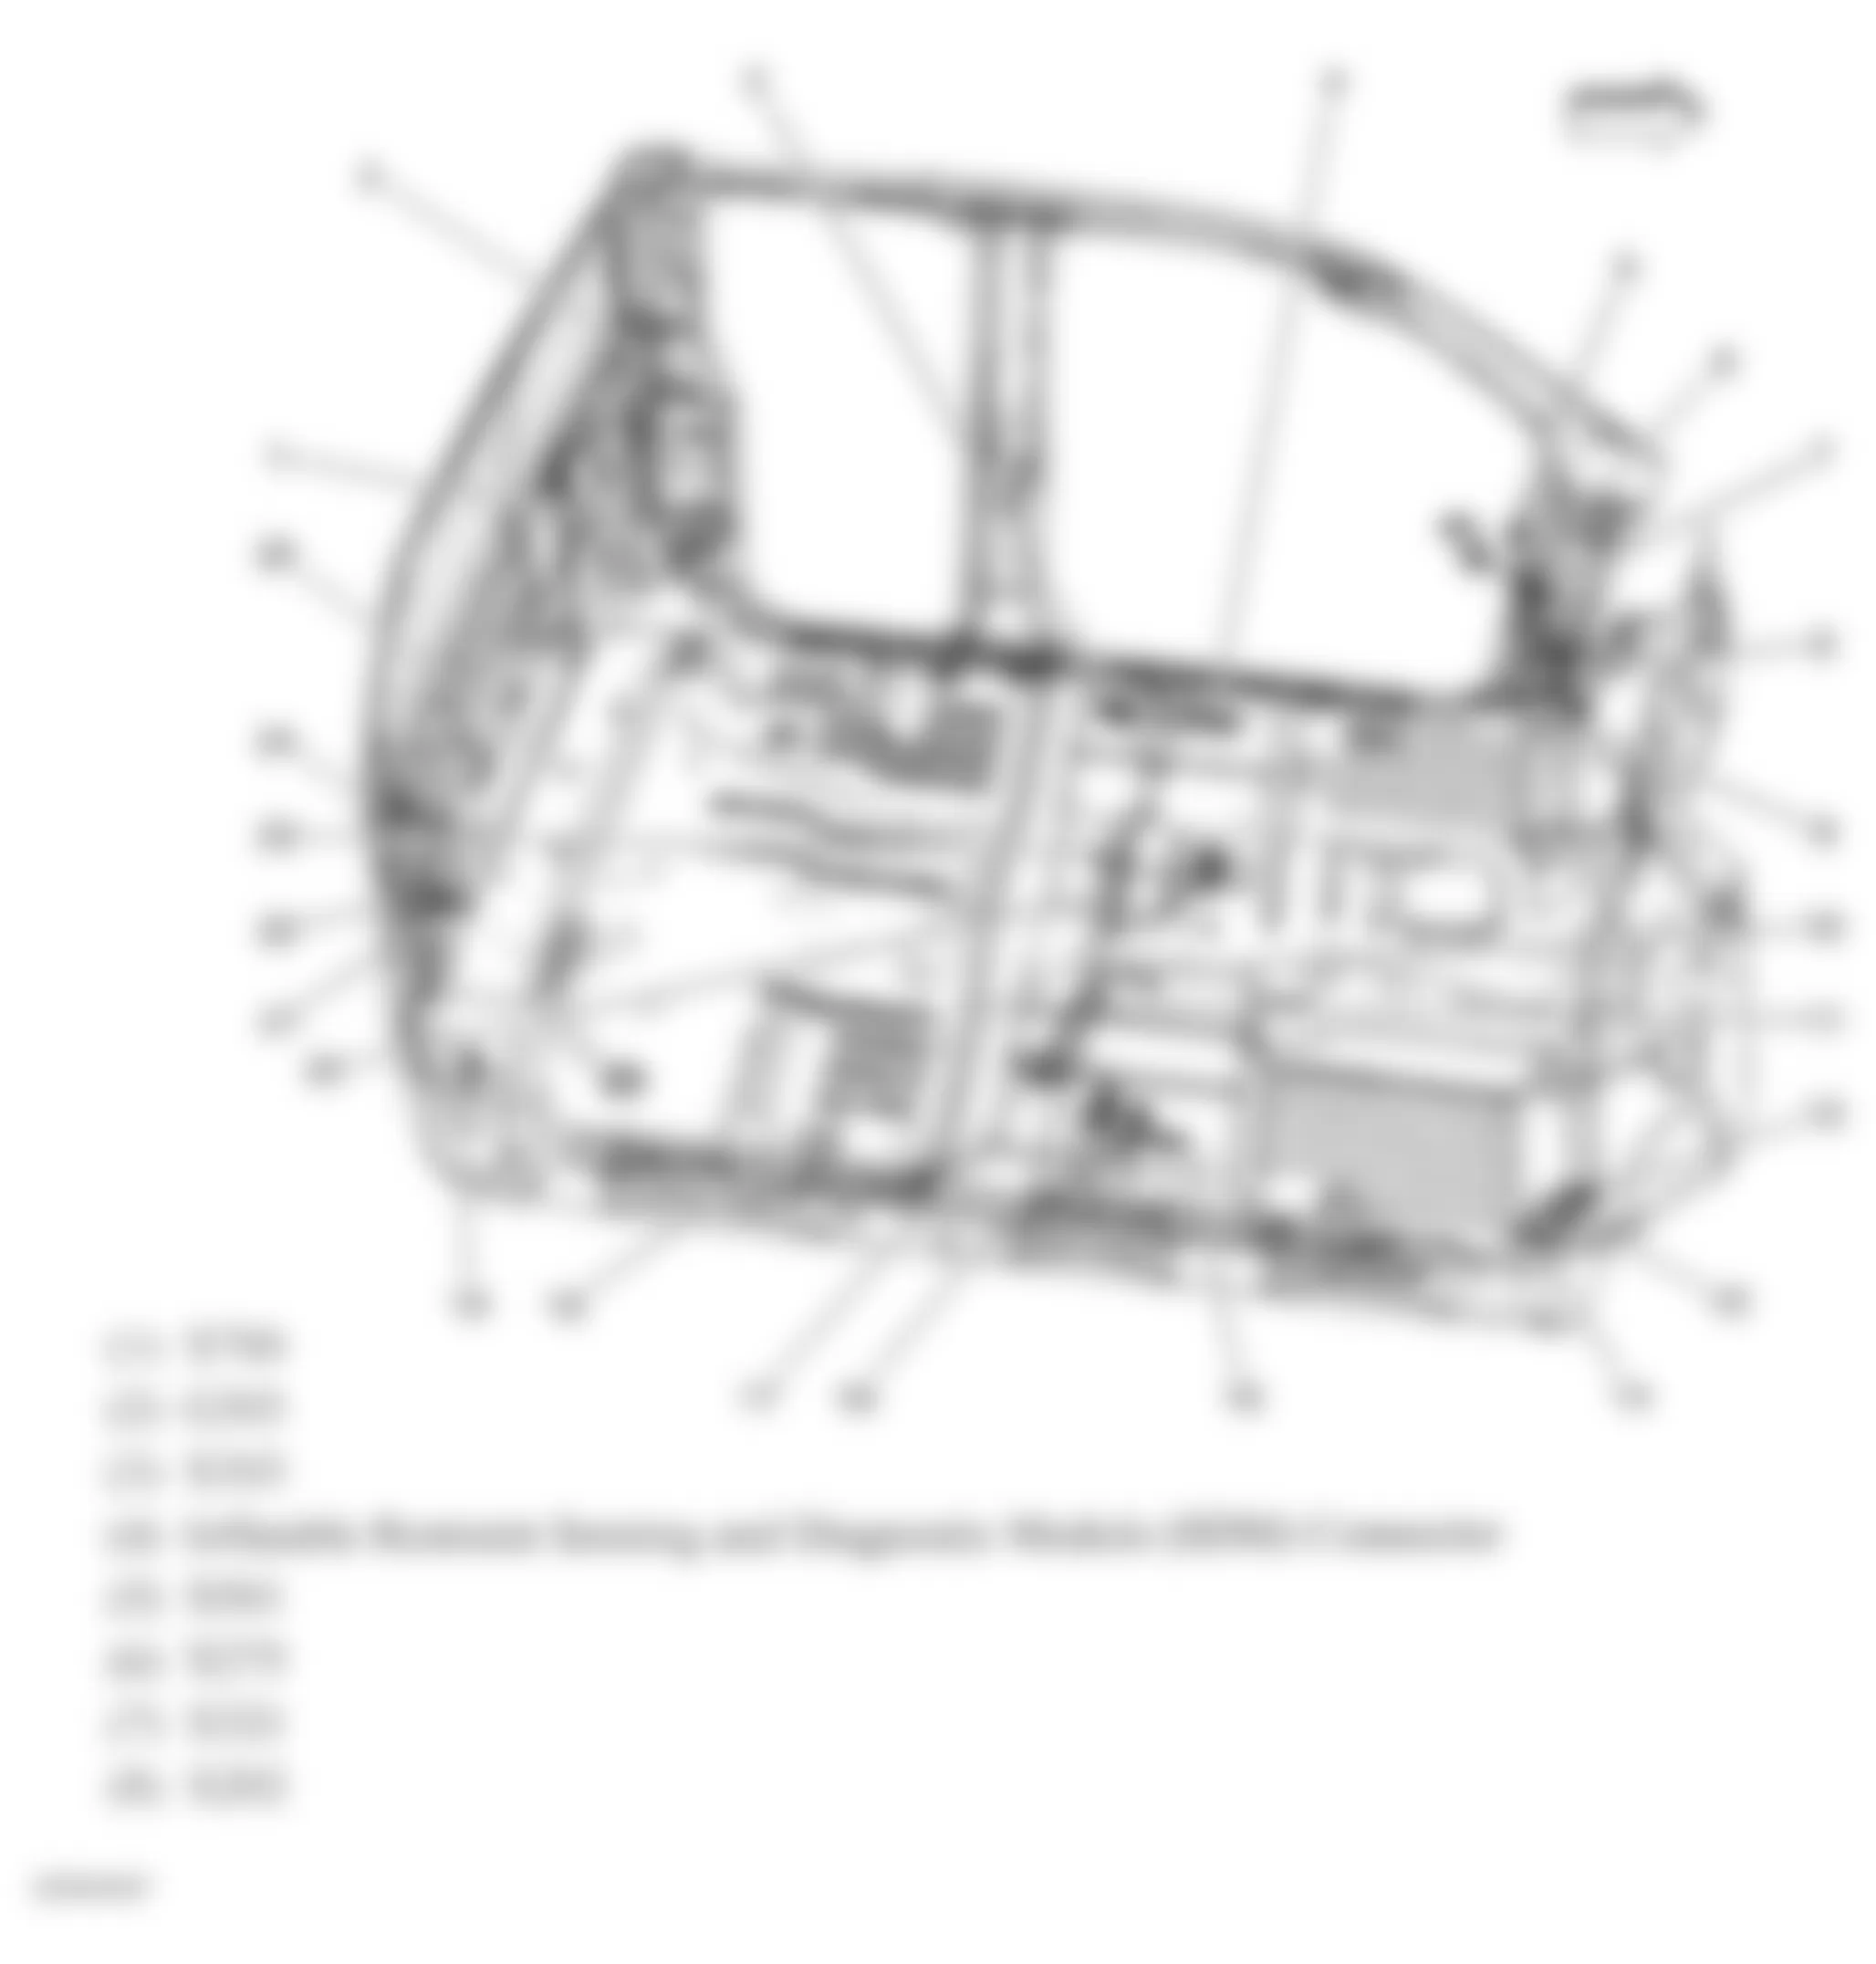 Chevrolet Silverado 2500 HD 2009 - Component Locations -  Passenger Compartment (Extended Cab) (1 Of 2)